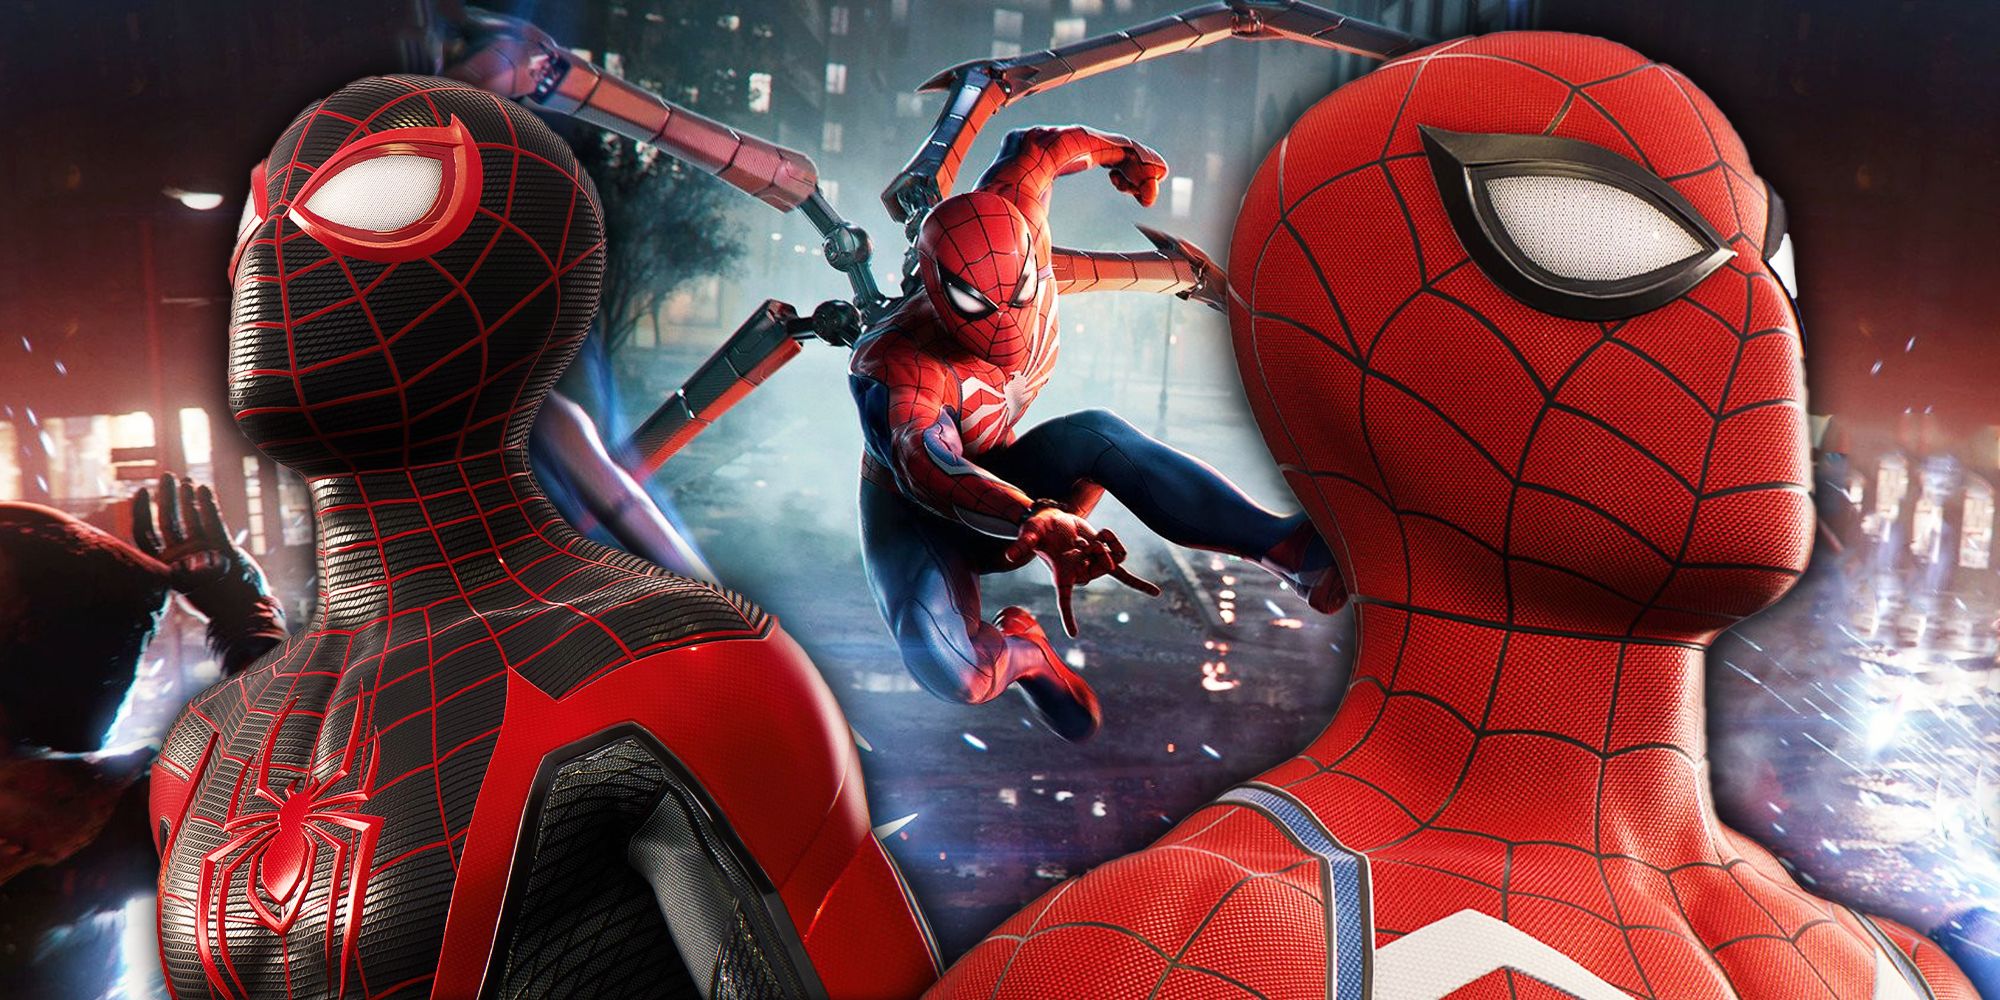 How Long Does Marvel's Spider-Man 2 Take to Beat?